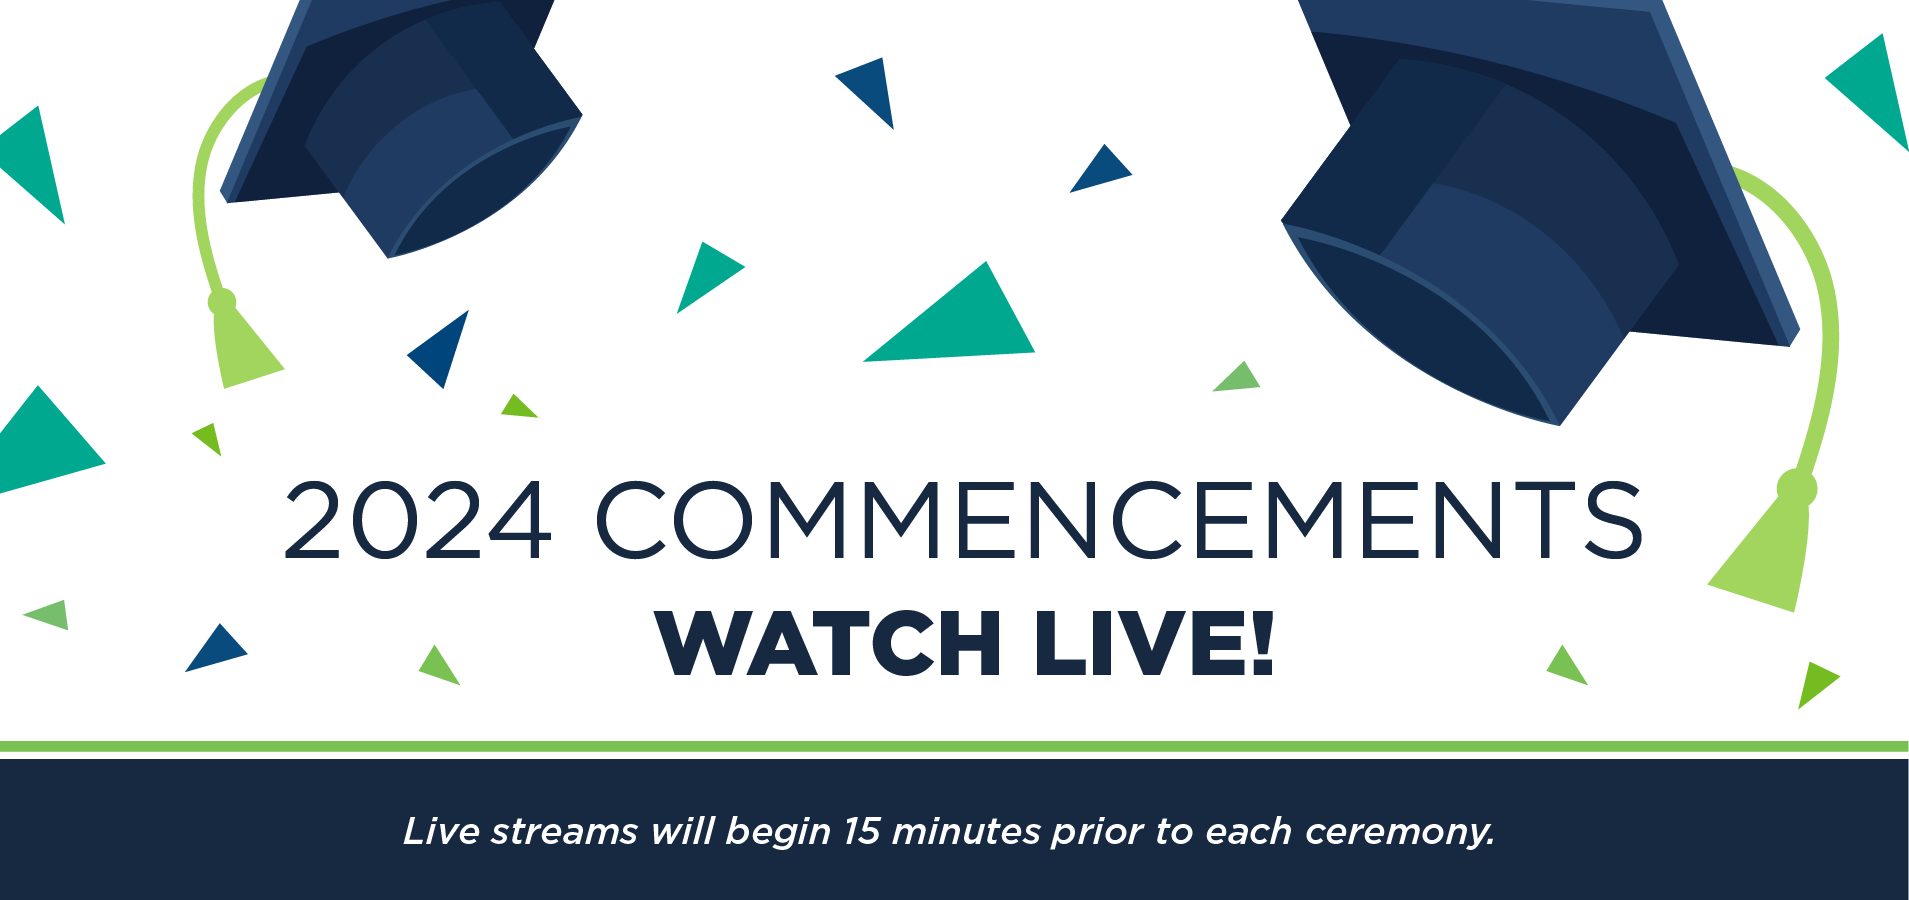 2024 Commencements. Watch Live!